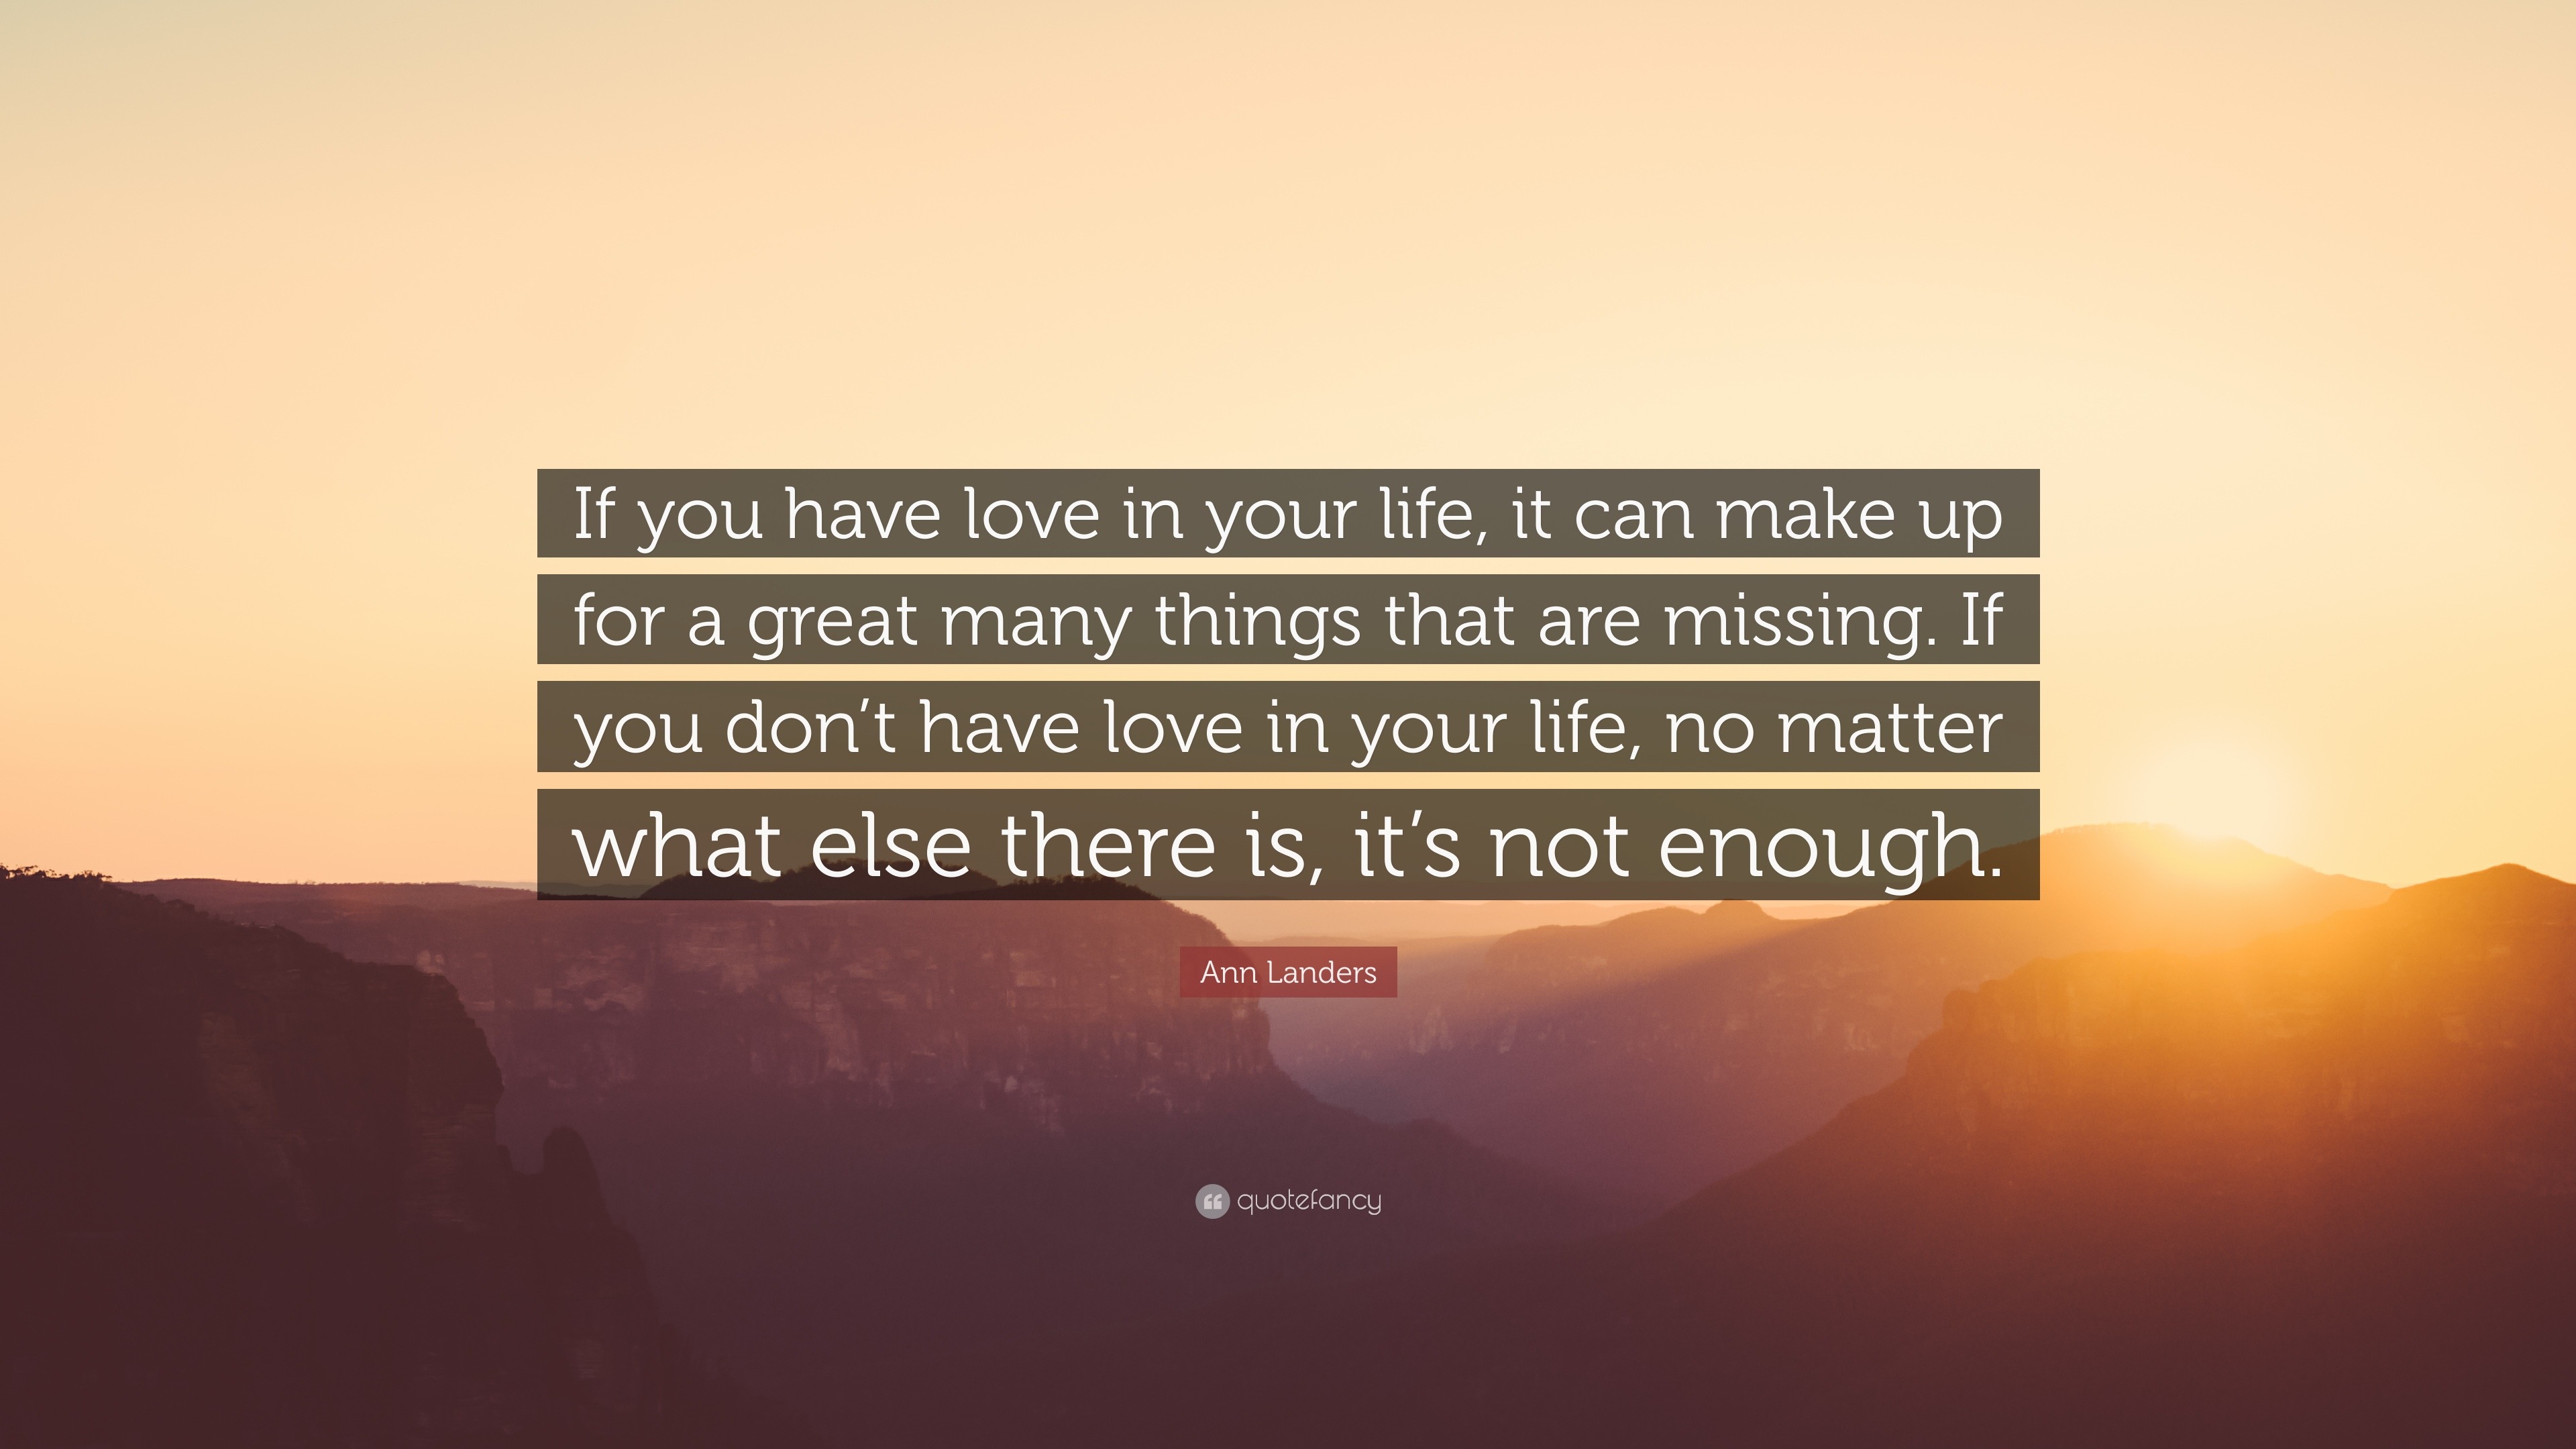 Ann Landers Quote “If you have love in your life it can make